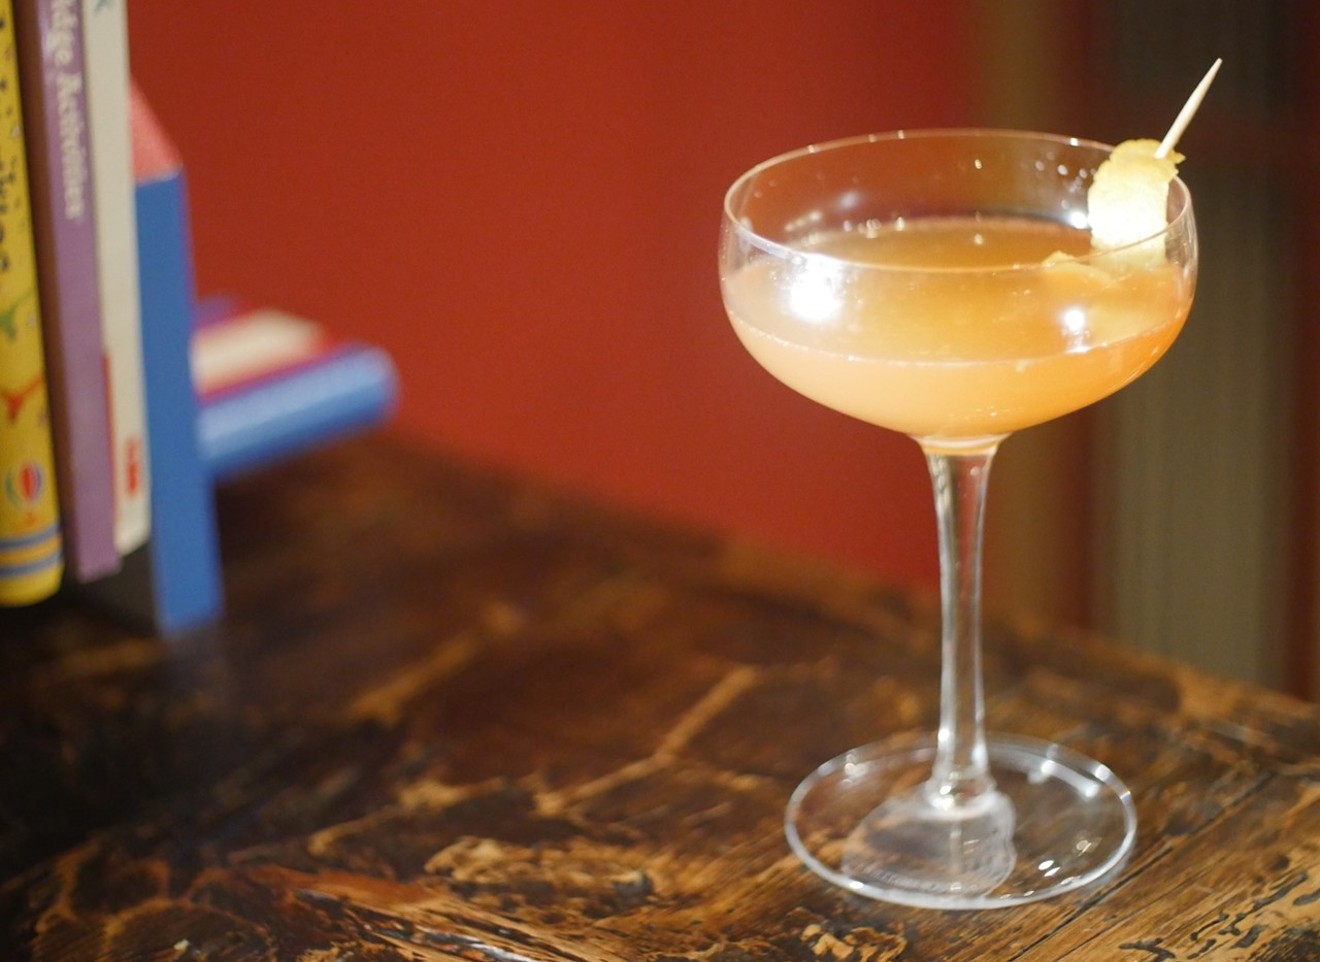 A "Poor Man's Champagne Cocktail," one of the first drinks submitted for Quarantending.